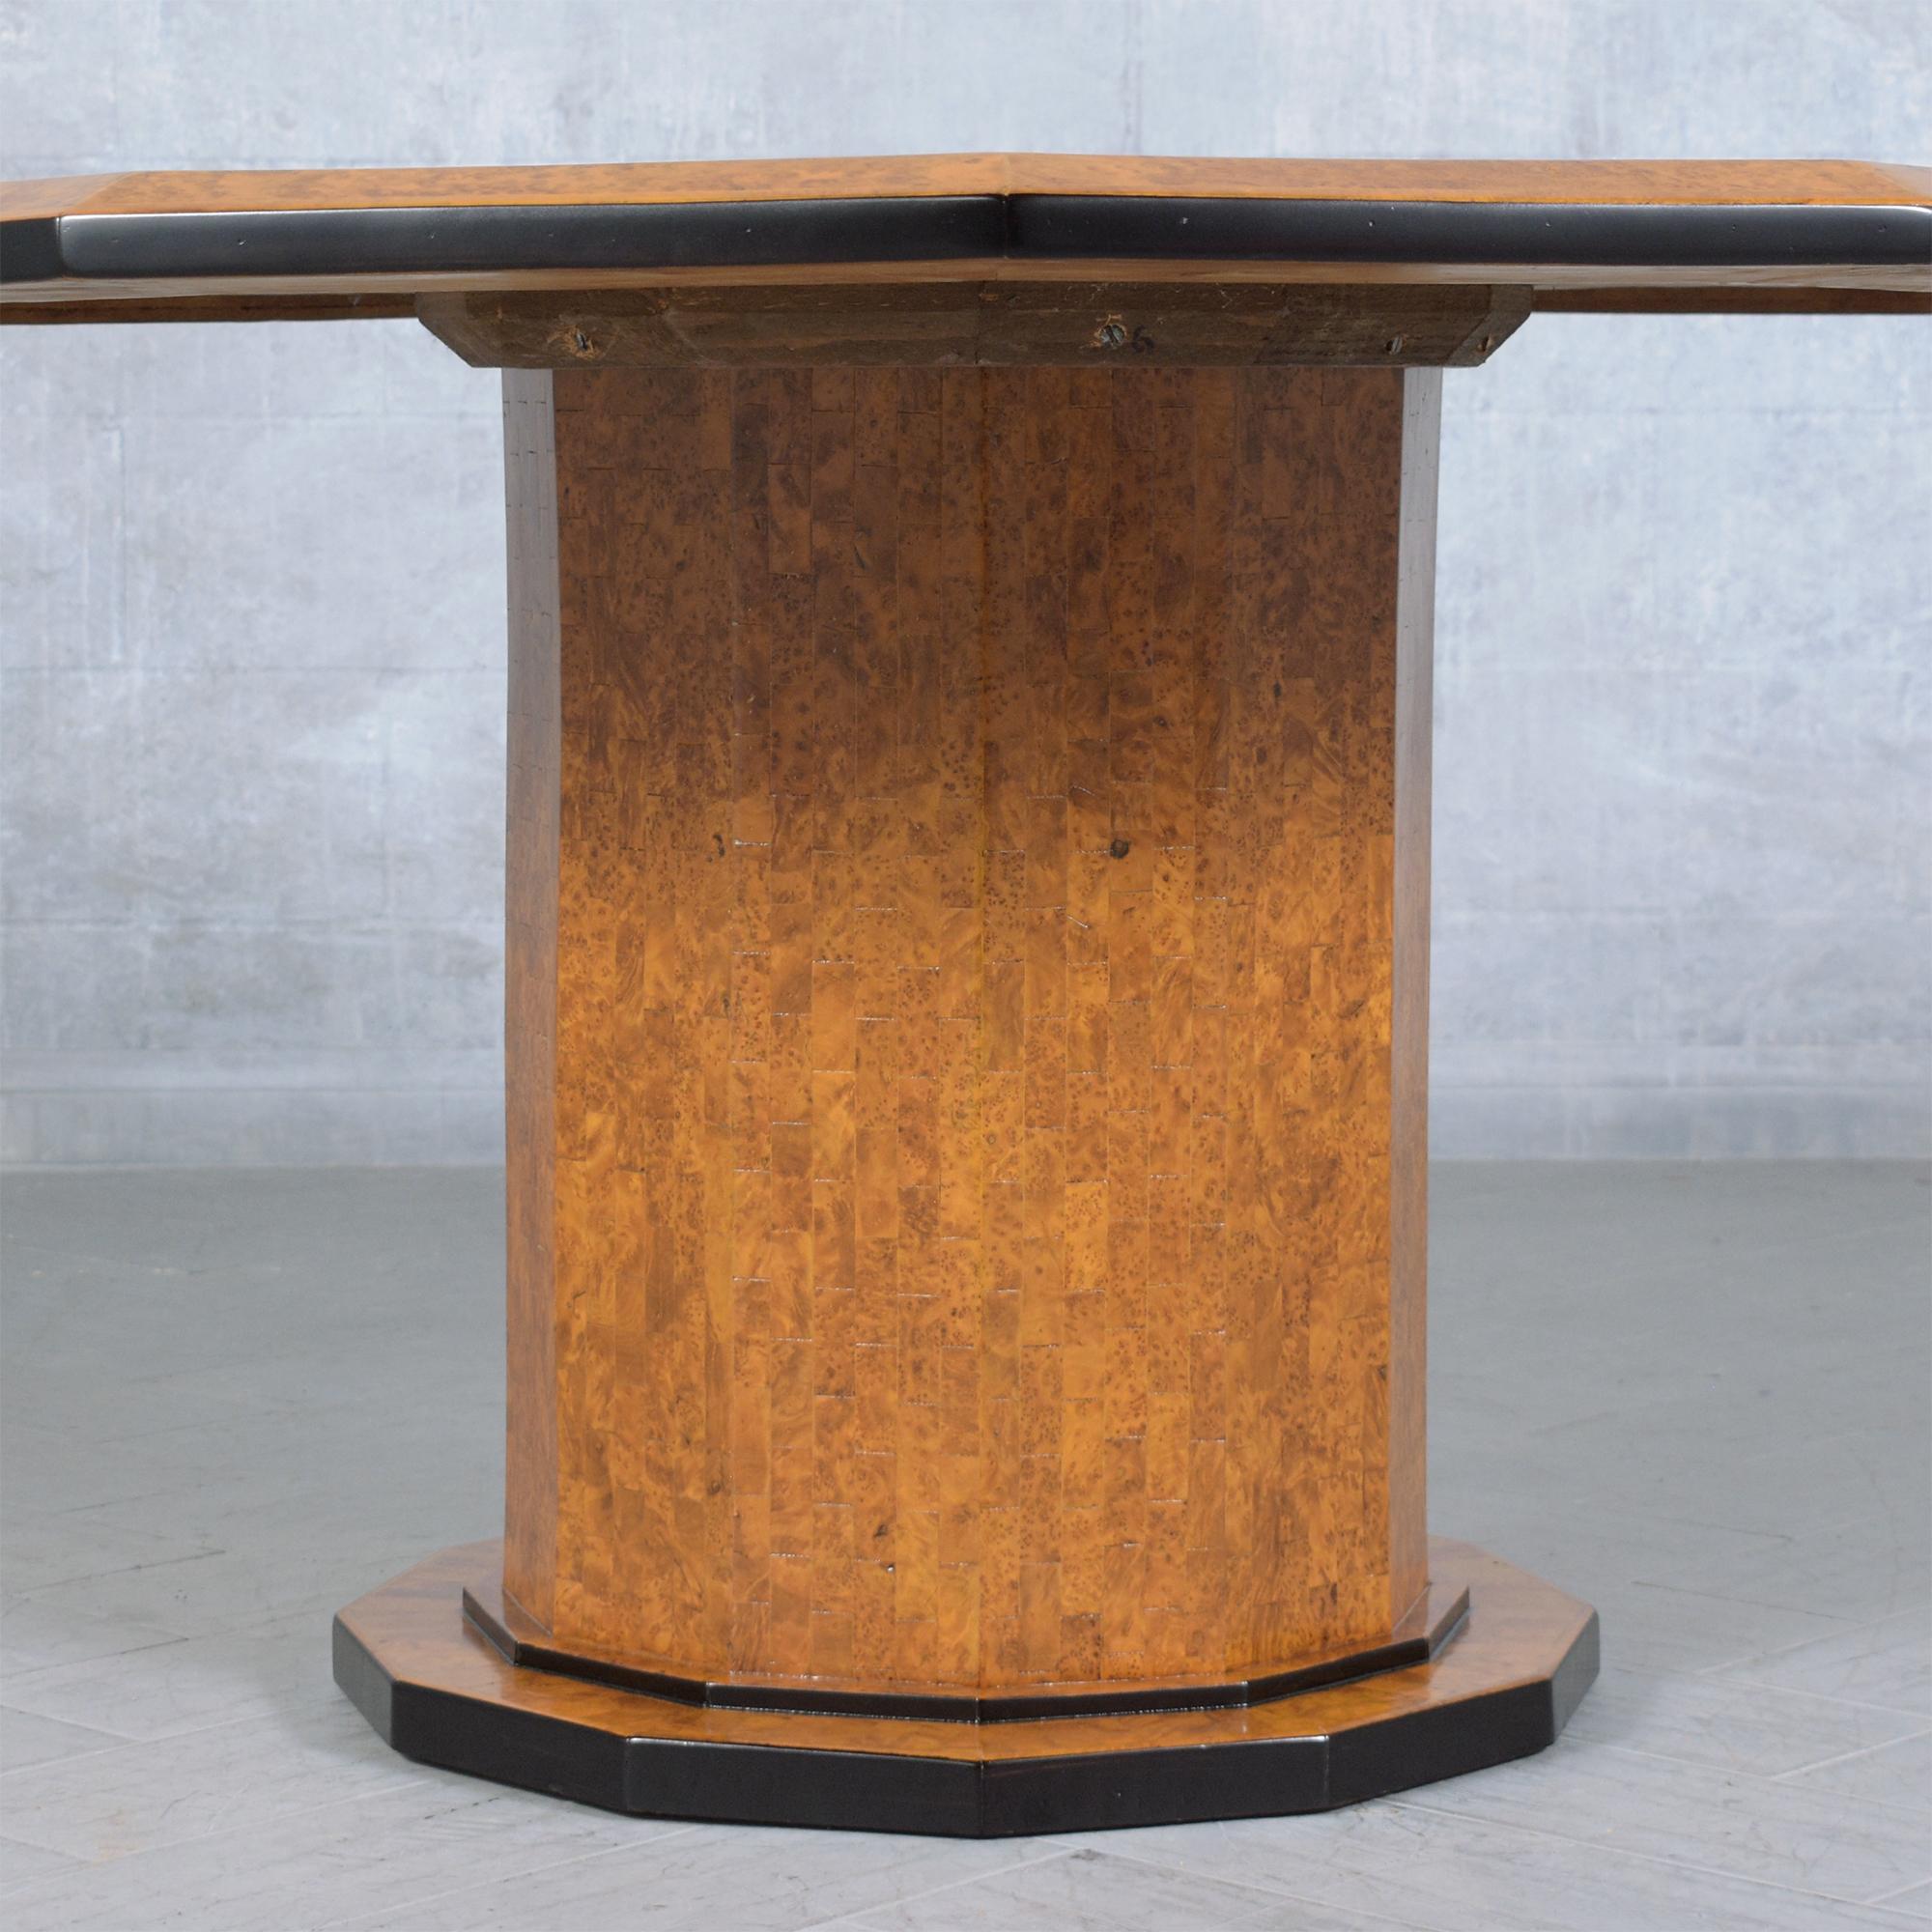 1880s Antique Walnut Center Table with Dodecagon Top and Mother-of-Pearl Inlays For Sale 2